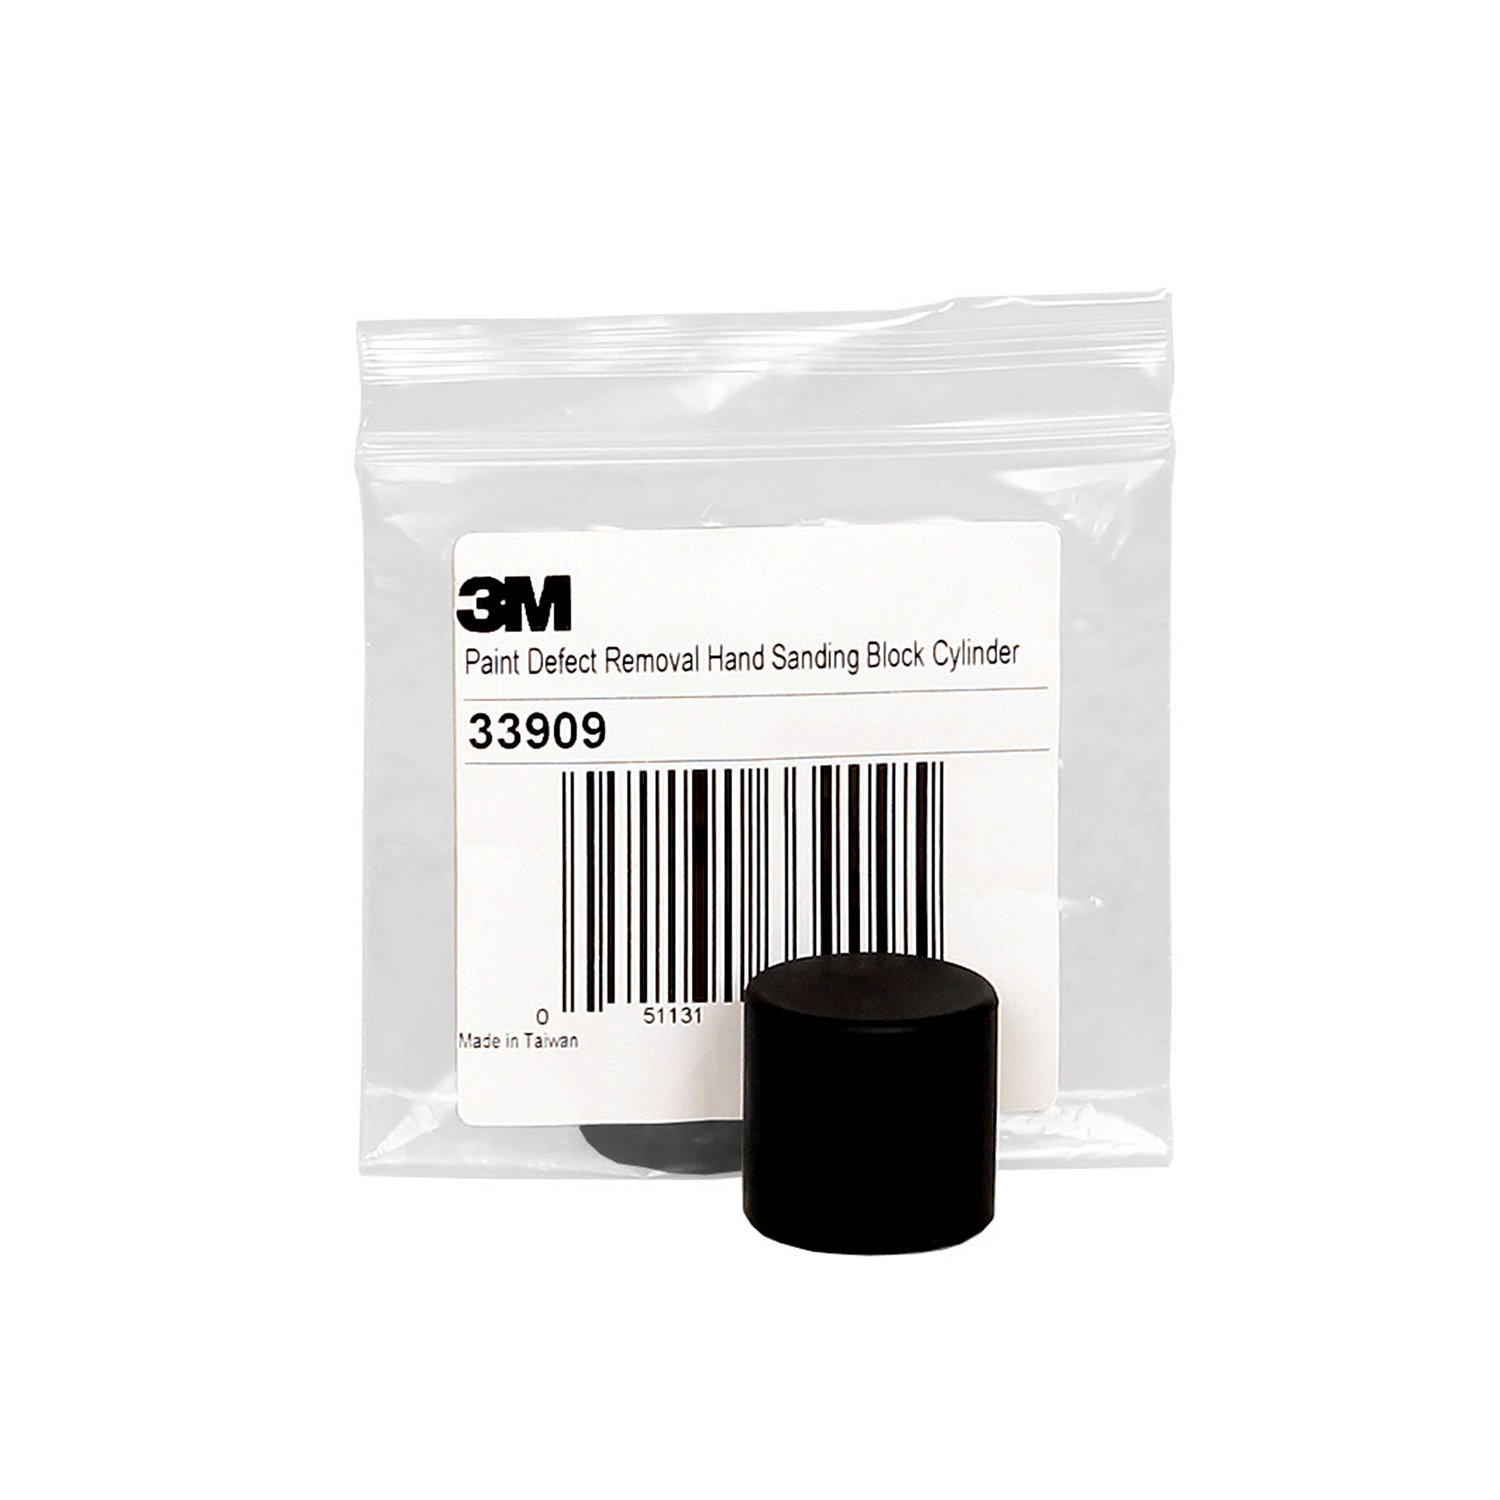 7100054229 - 3M Paint Defect Removal Cylinder, 38909, 10 per case